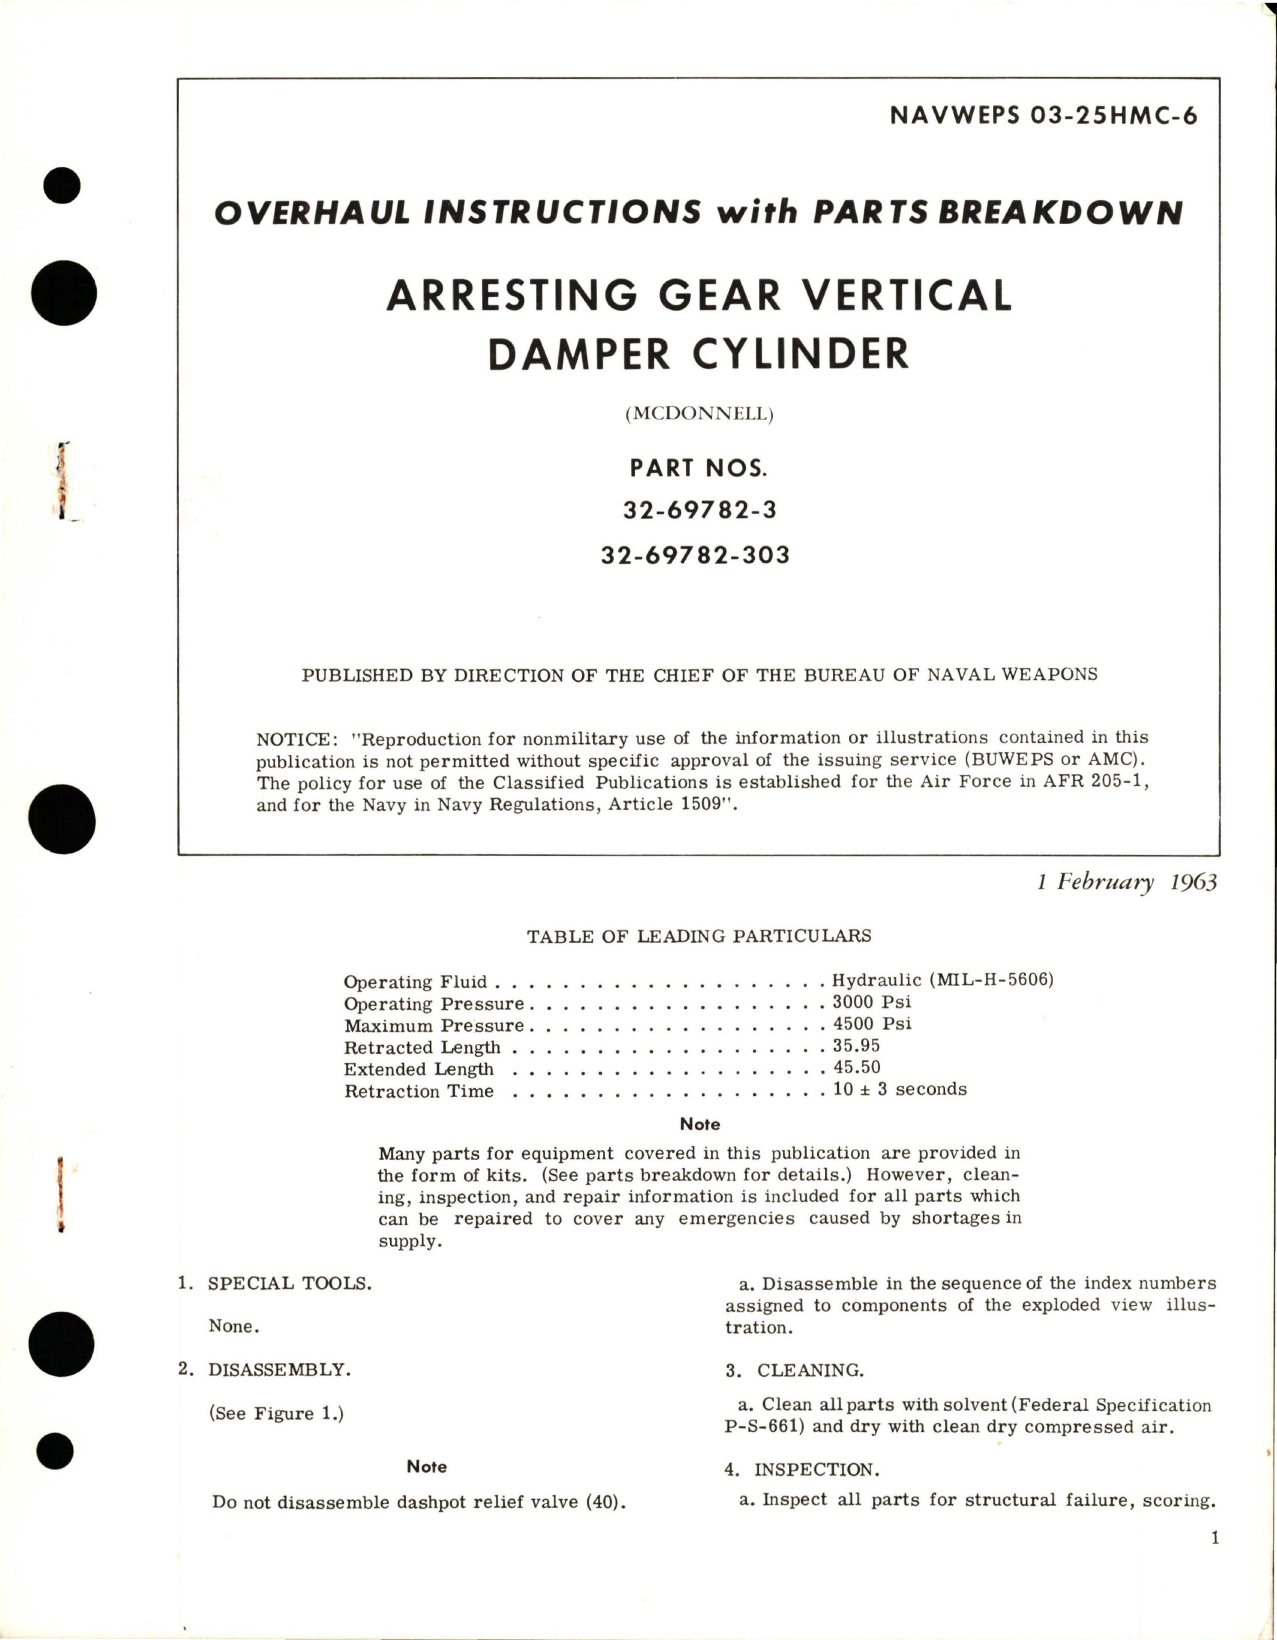 Sample page 1 from AirCorps Library document: Overhaul Instructions with Parts Breakdown for Arresting Gear Vertical Damper Cylinder Parts 32-69782-3 and 32-69782-303